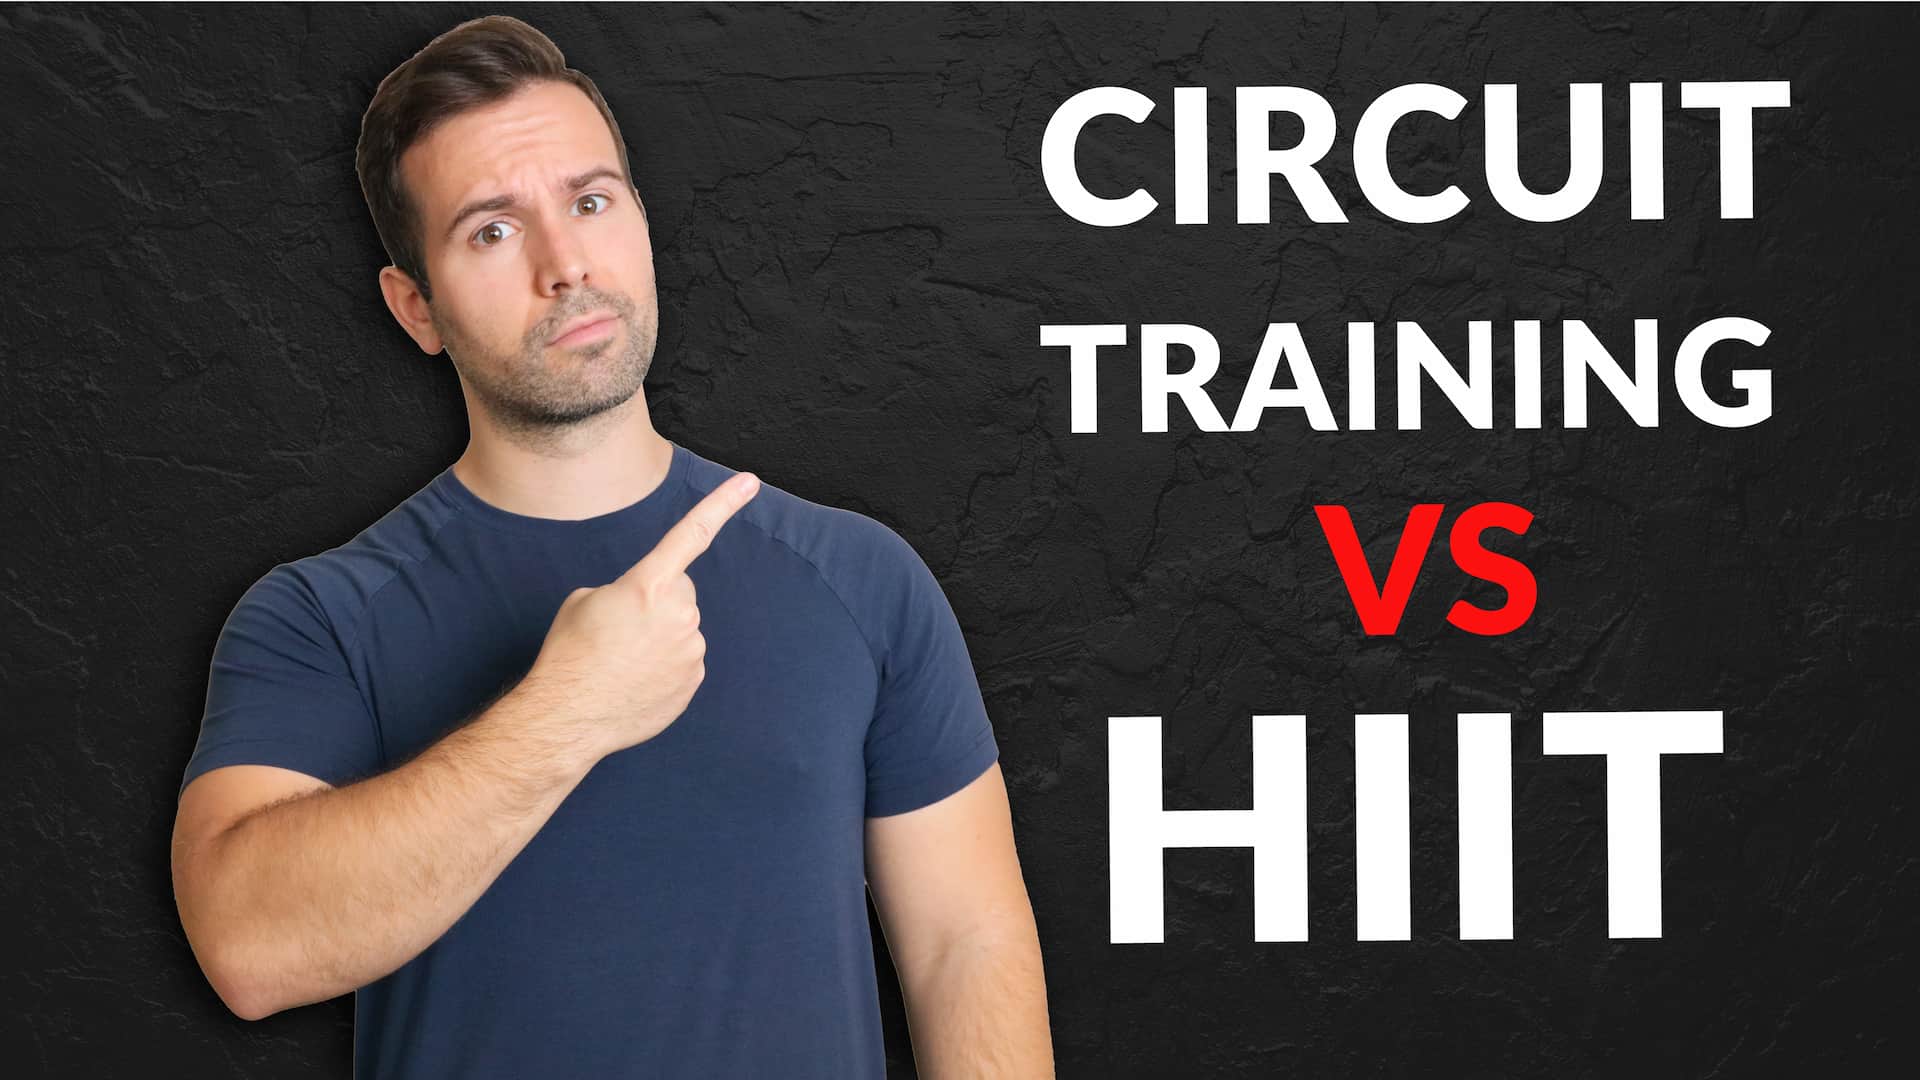 All You Need To Know About Circuit Training vs HIIT